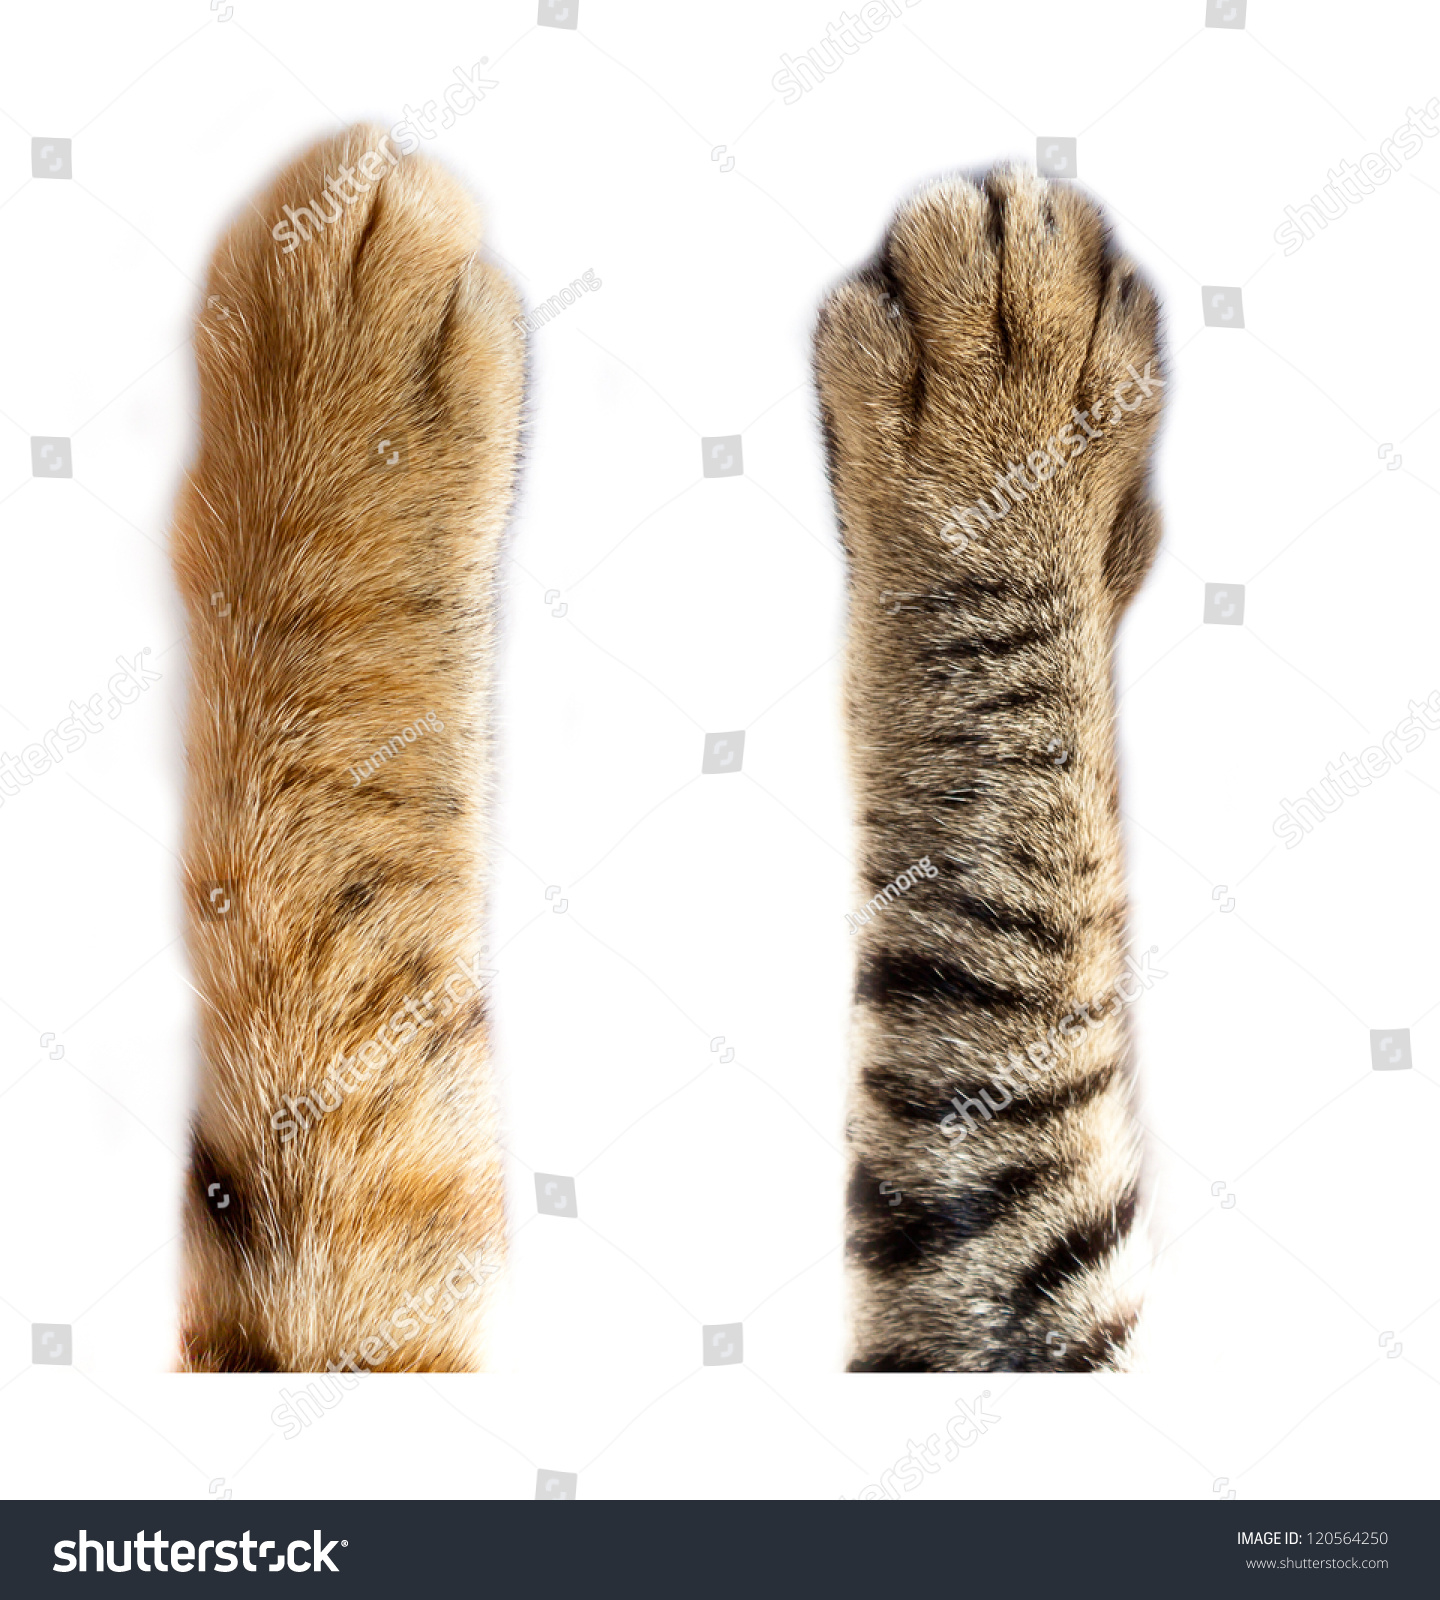 cat paws on white background #120564250